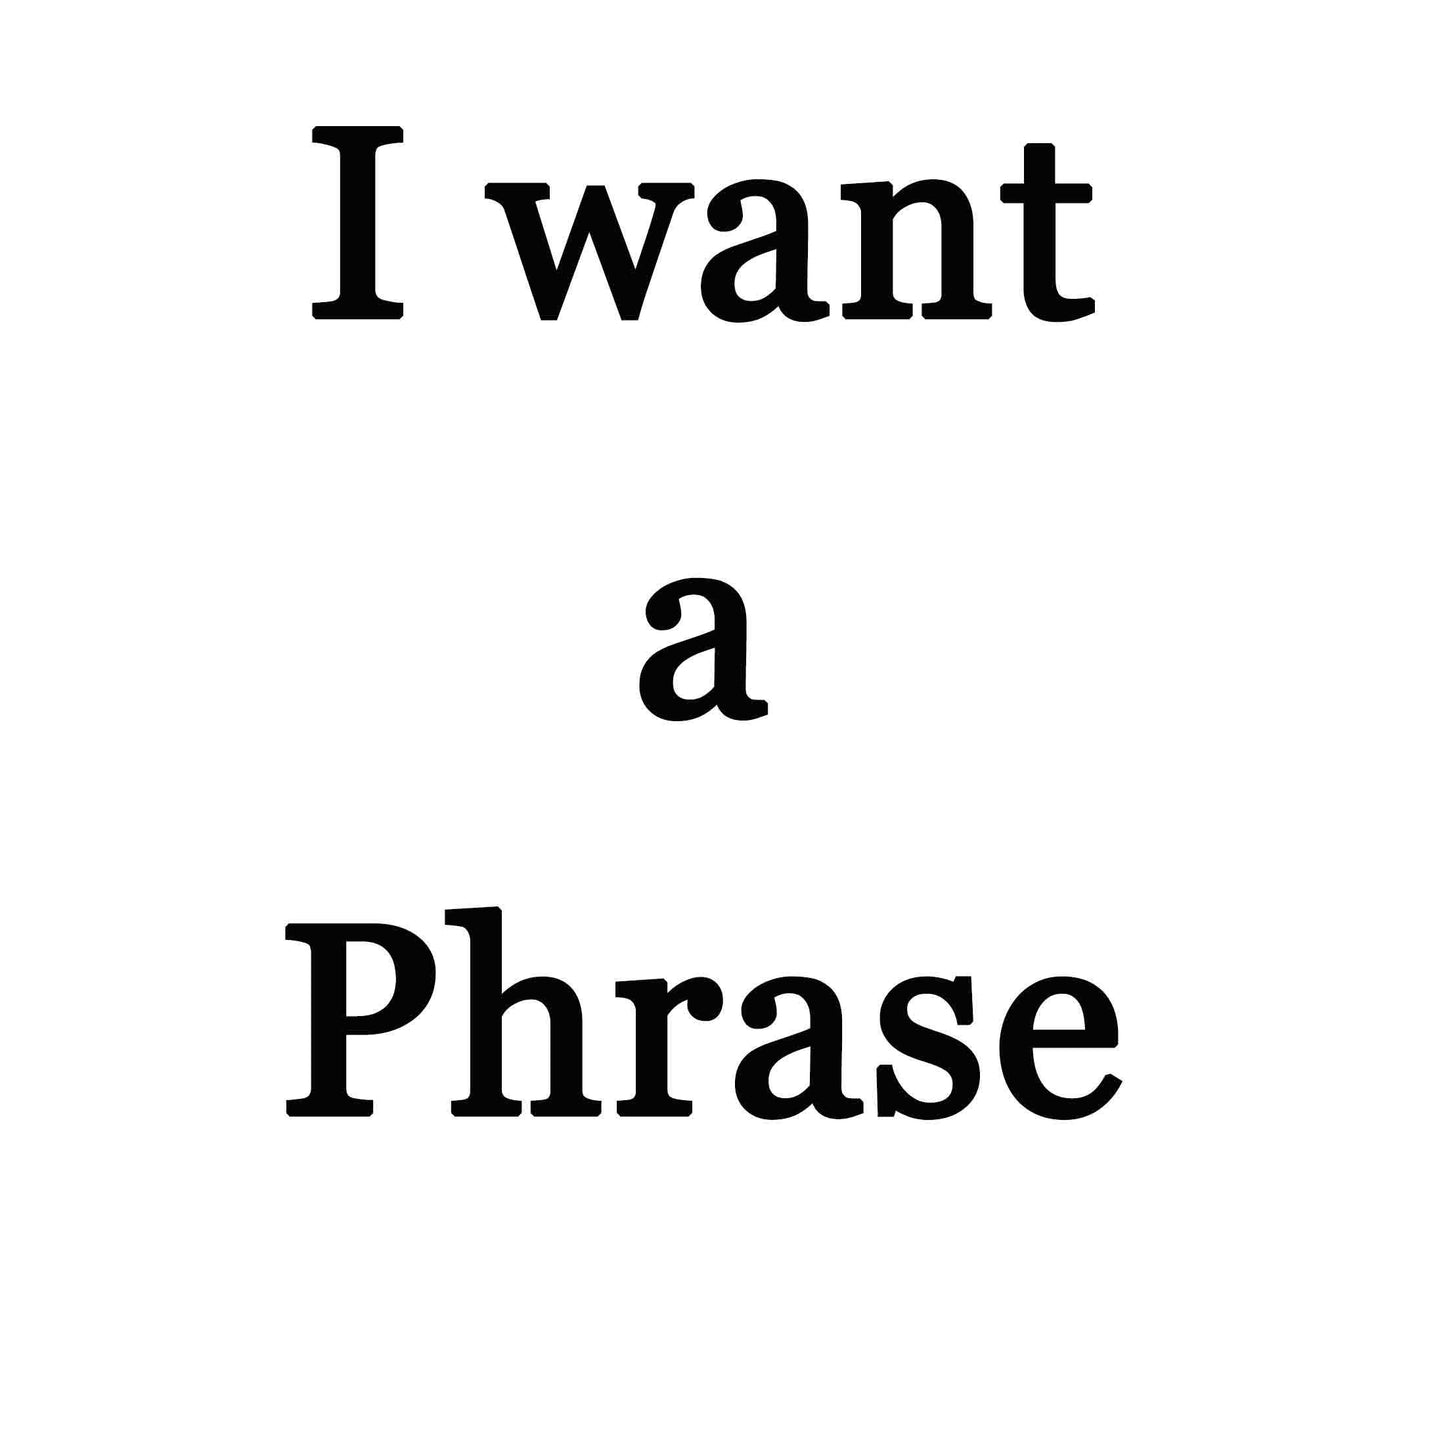 Yes, I want a Phrase on my artwork - FromPicToArt